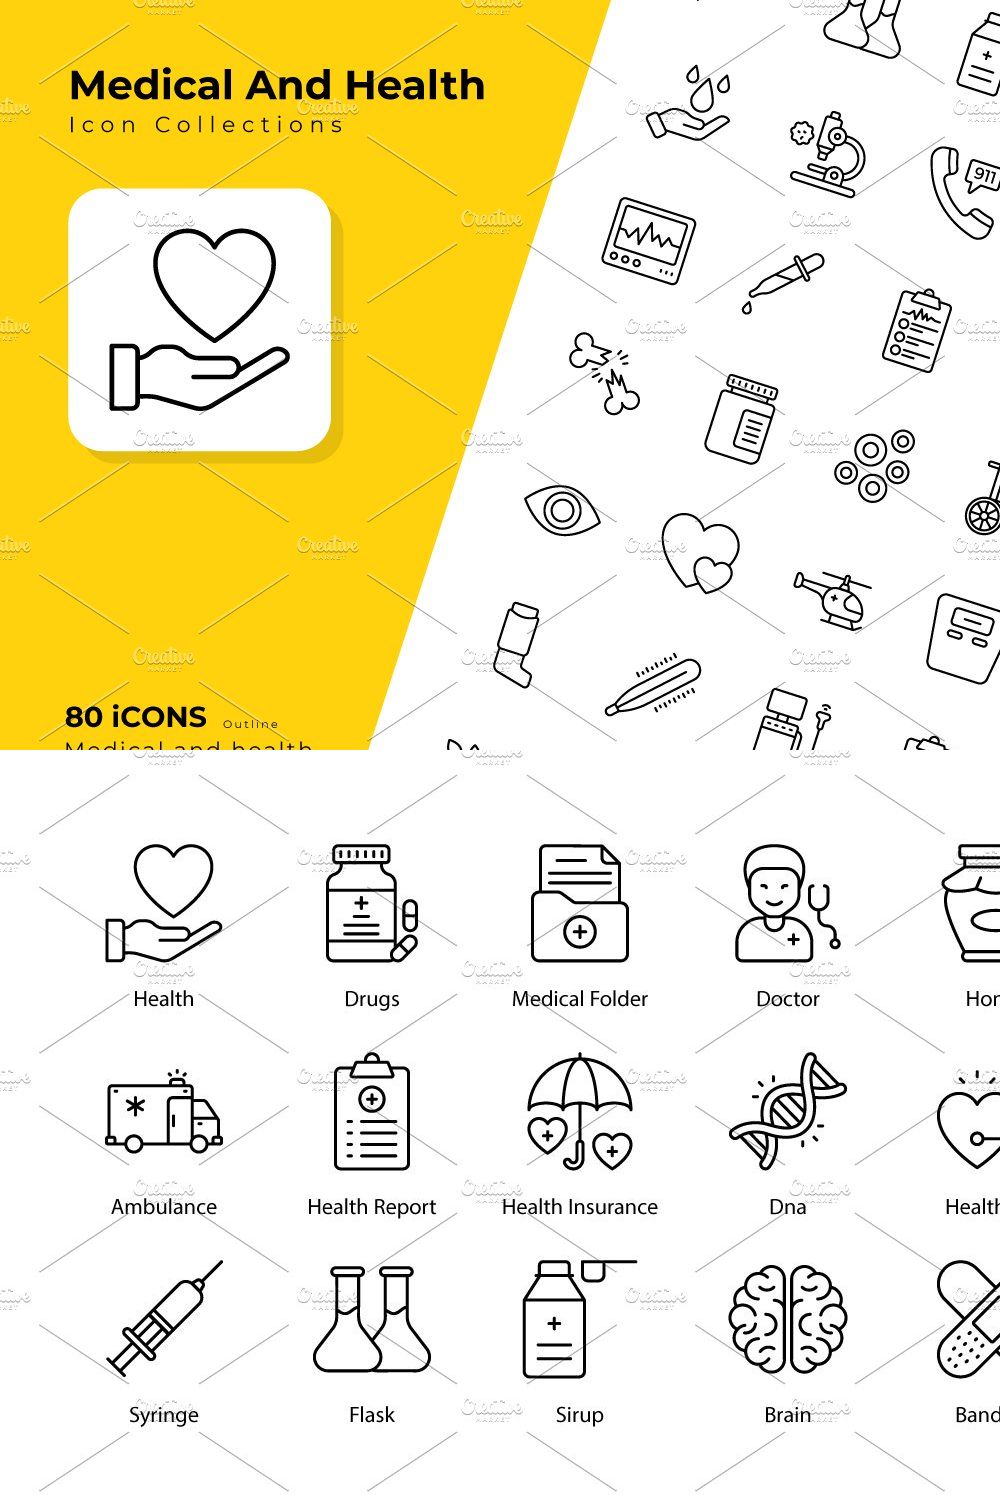 Medical and Heath icons pinterest preview image.